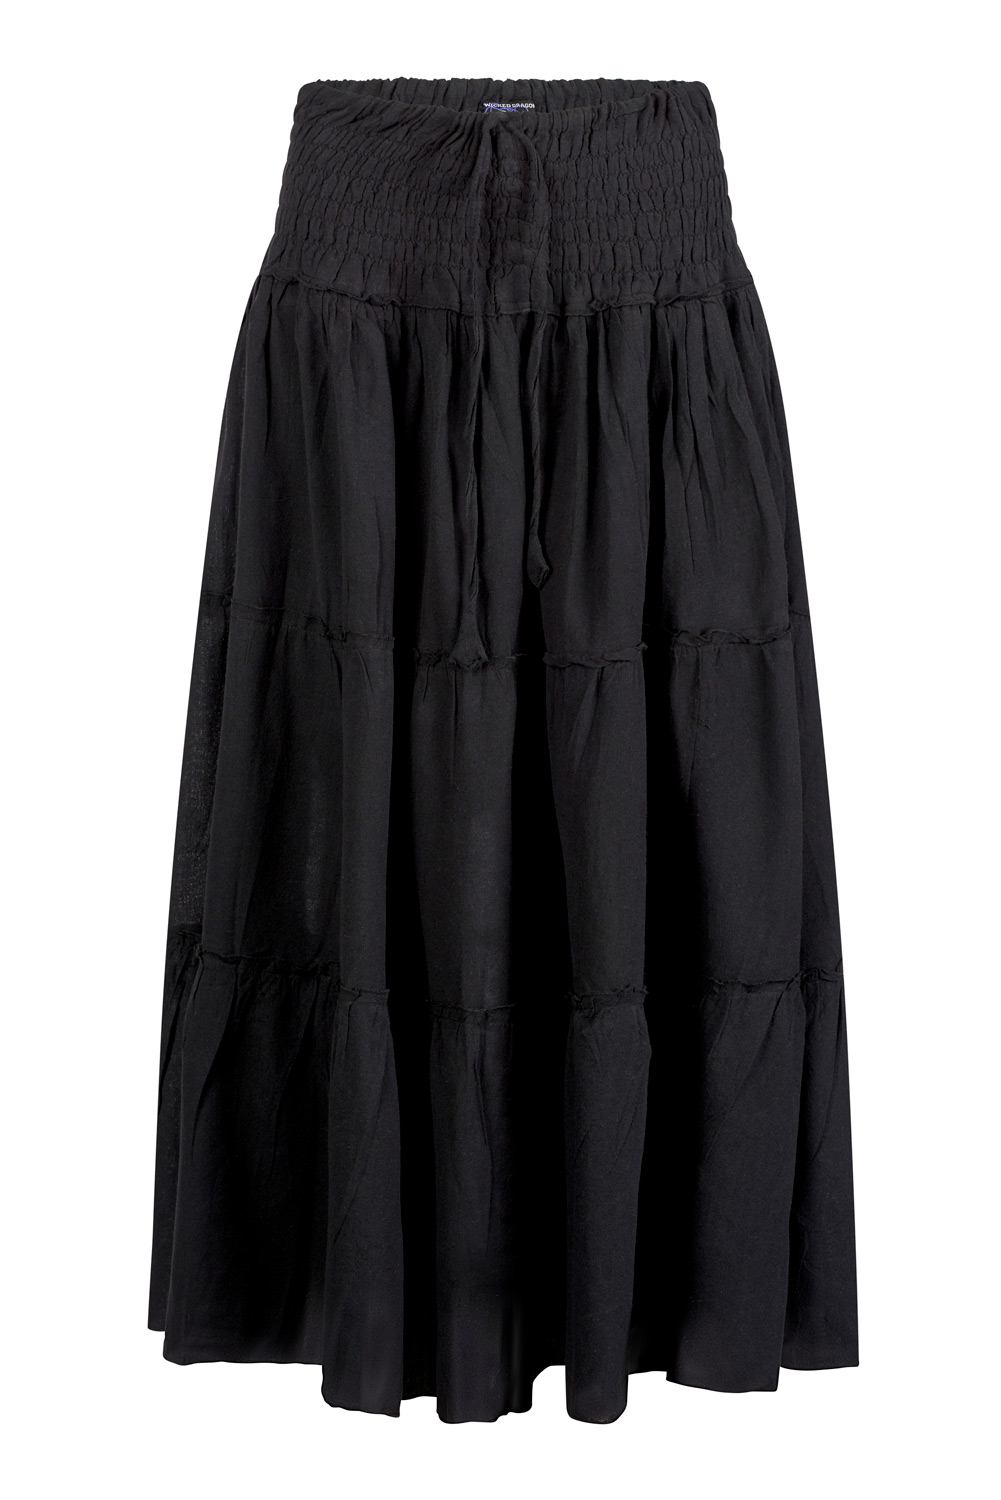 Wicked Dragon Clothing - Tiered maxi skirt with pockets